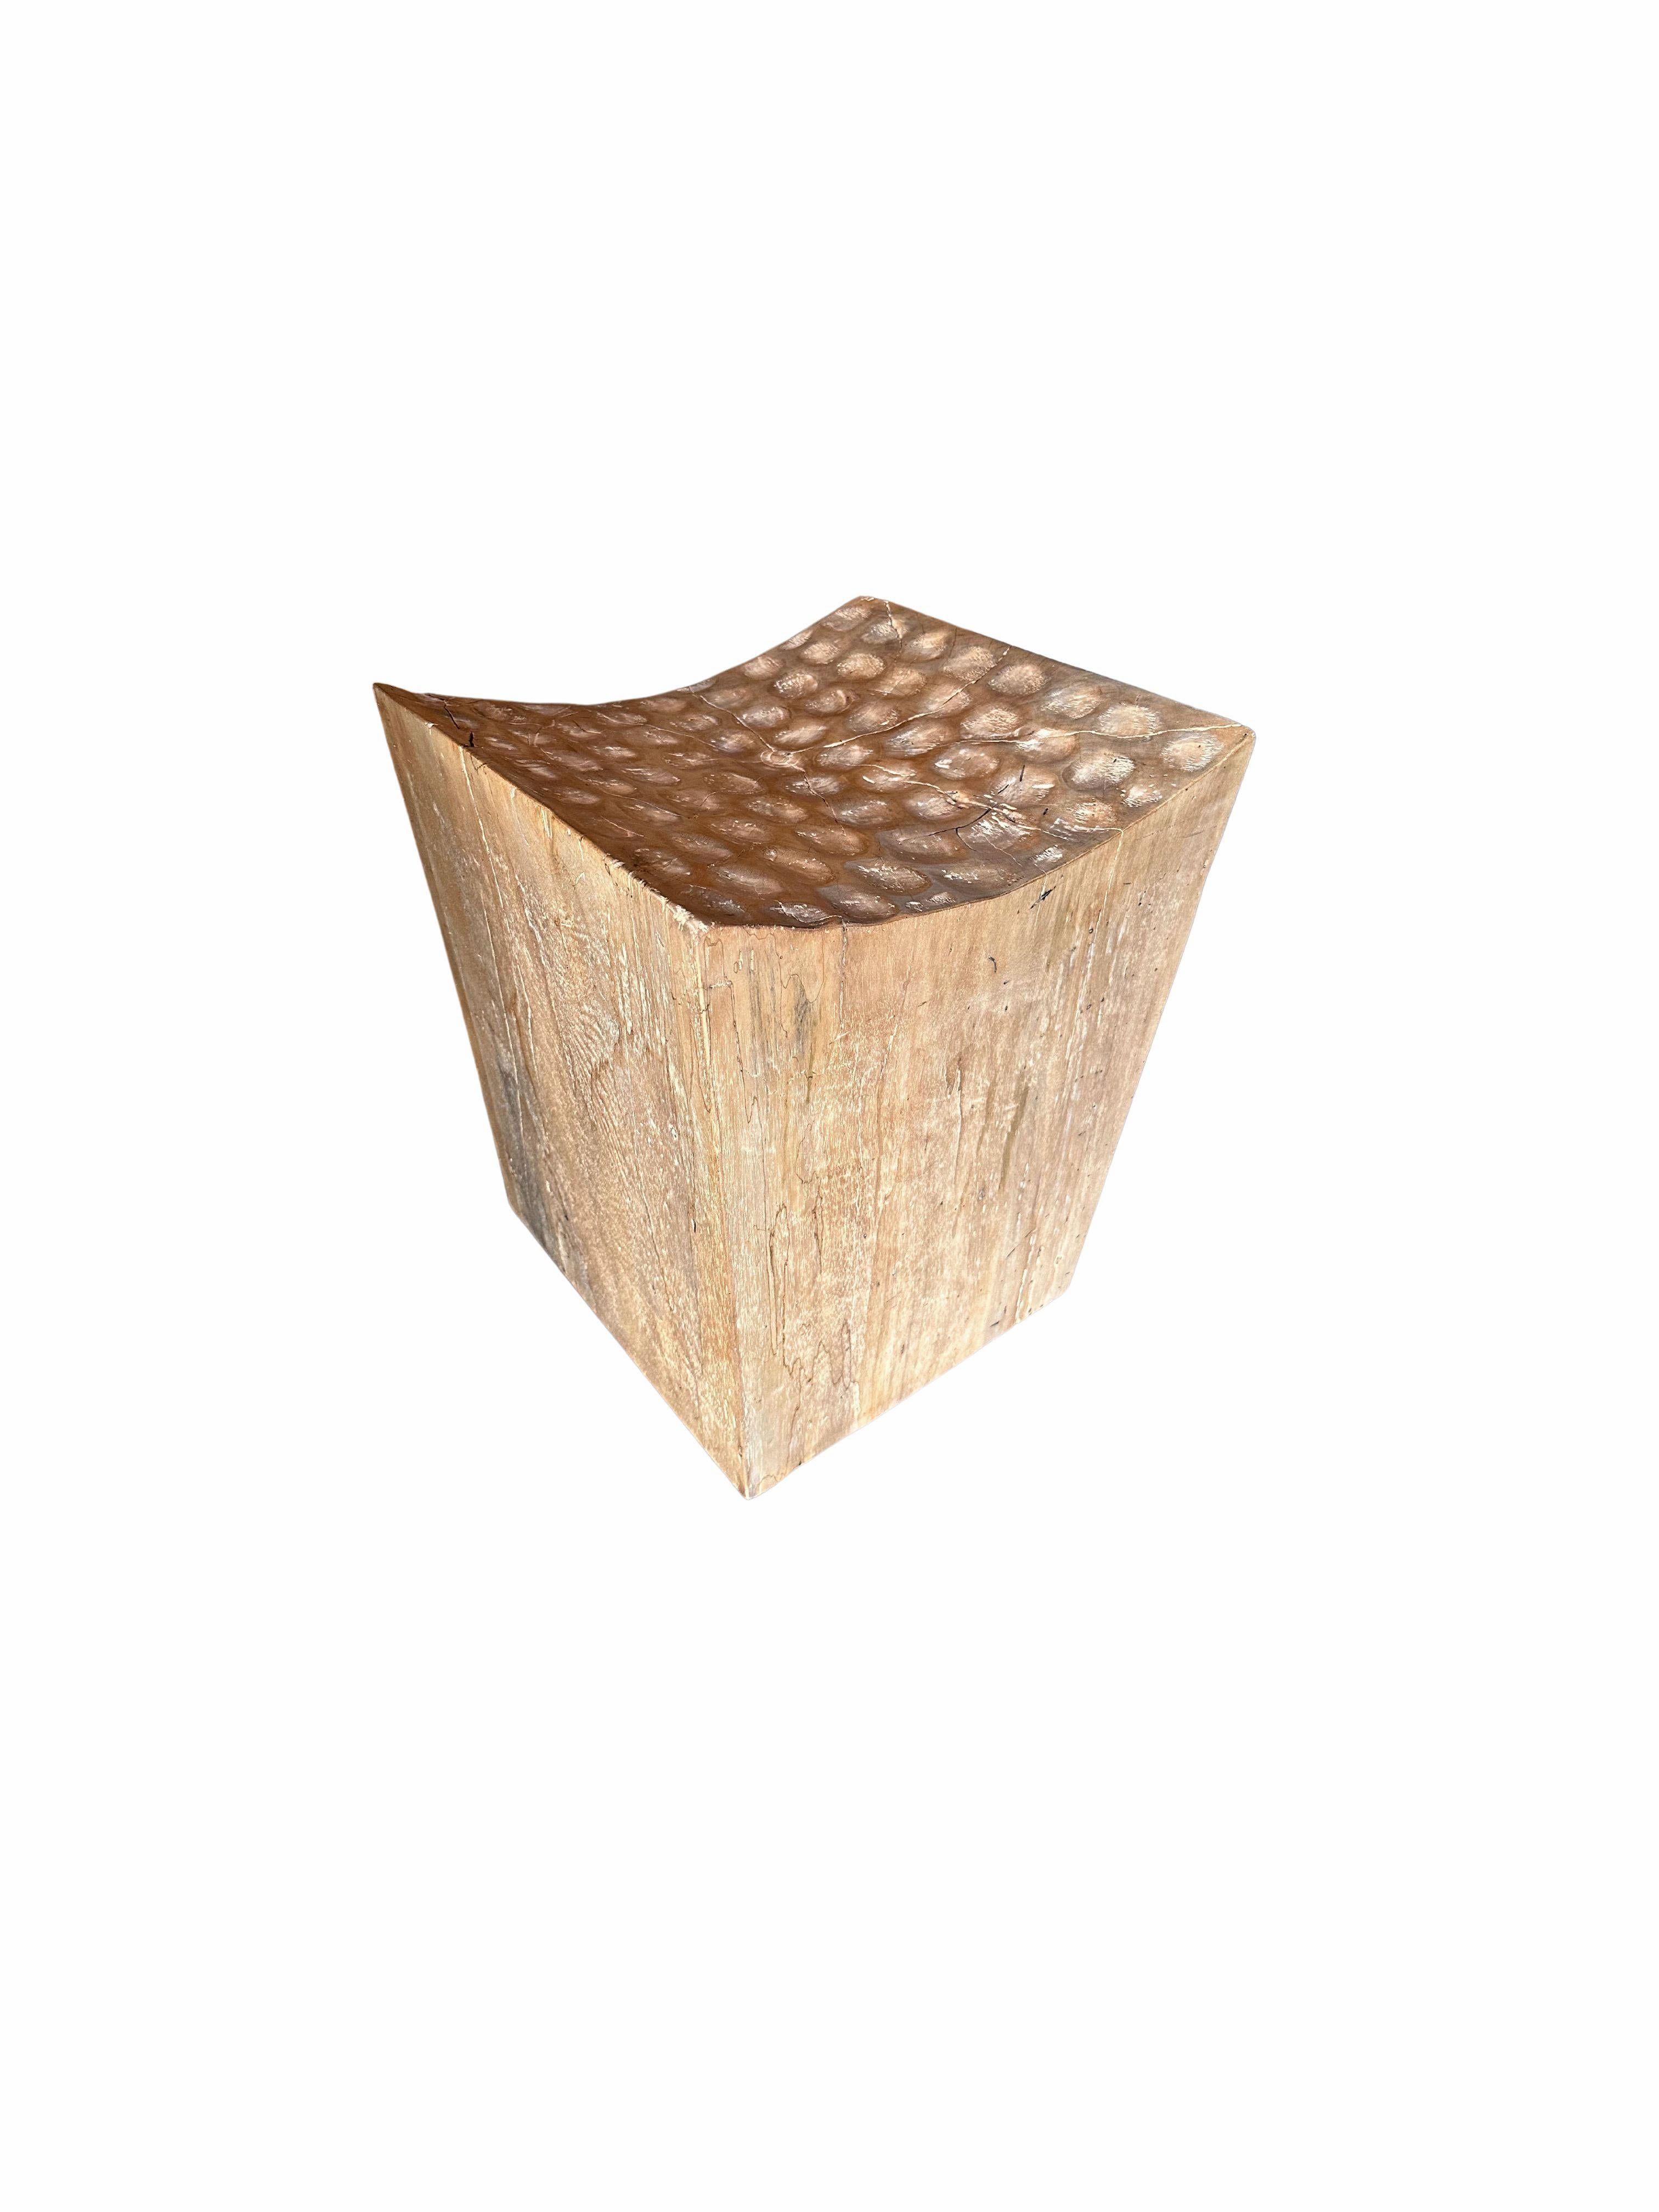 Hand-Crafted Sculptural Stool Carved from Solid Mango Wood Modern Organic For Sale